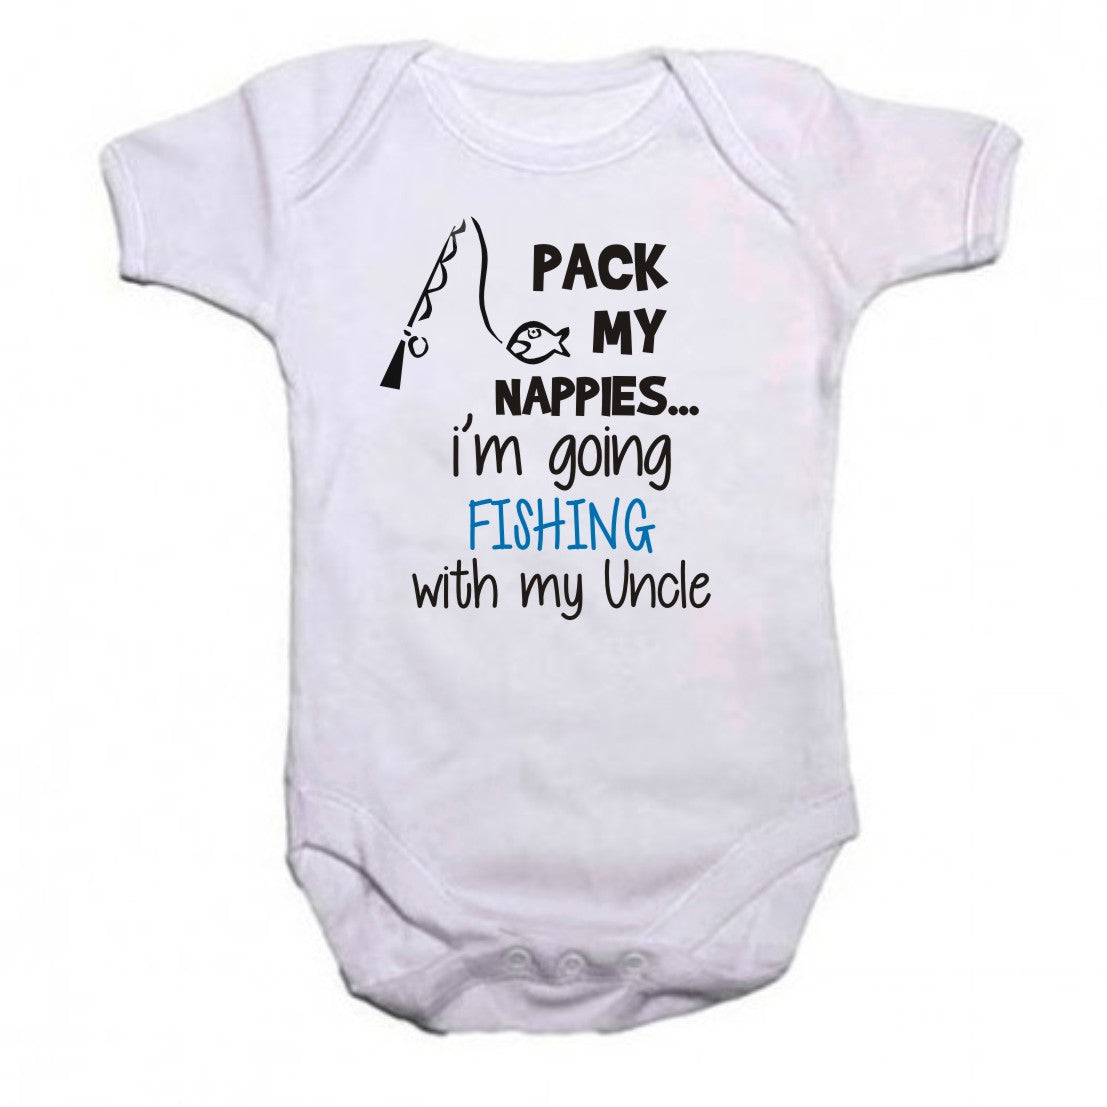 Pack my nappies I'm going fishing with my Daddy/Grandad/Uncle baby grow